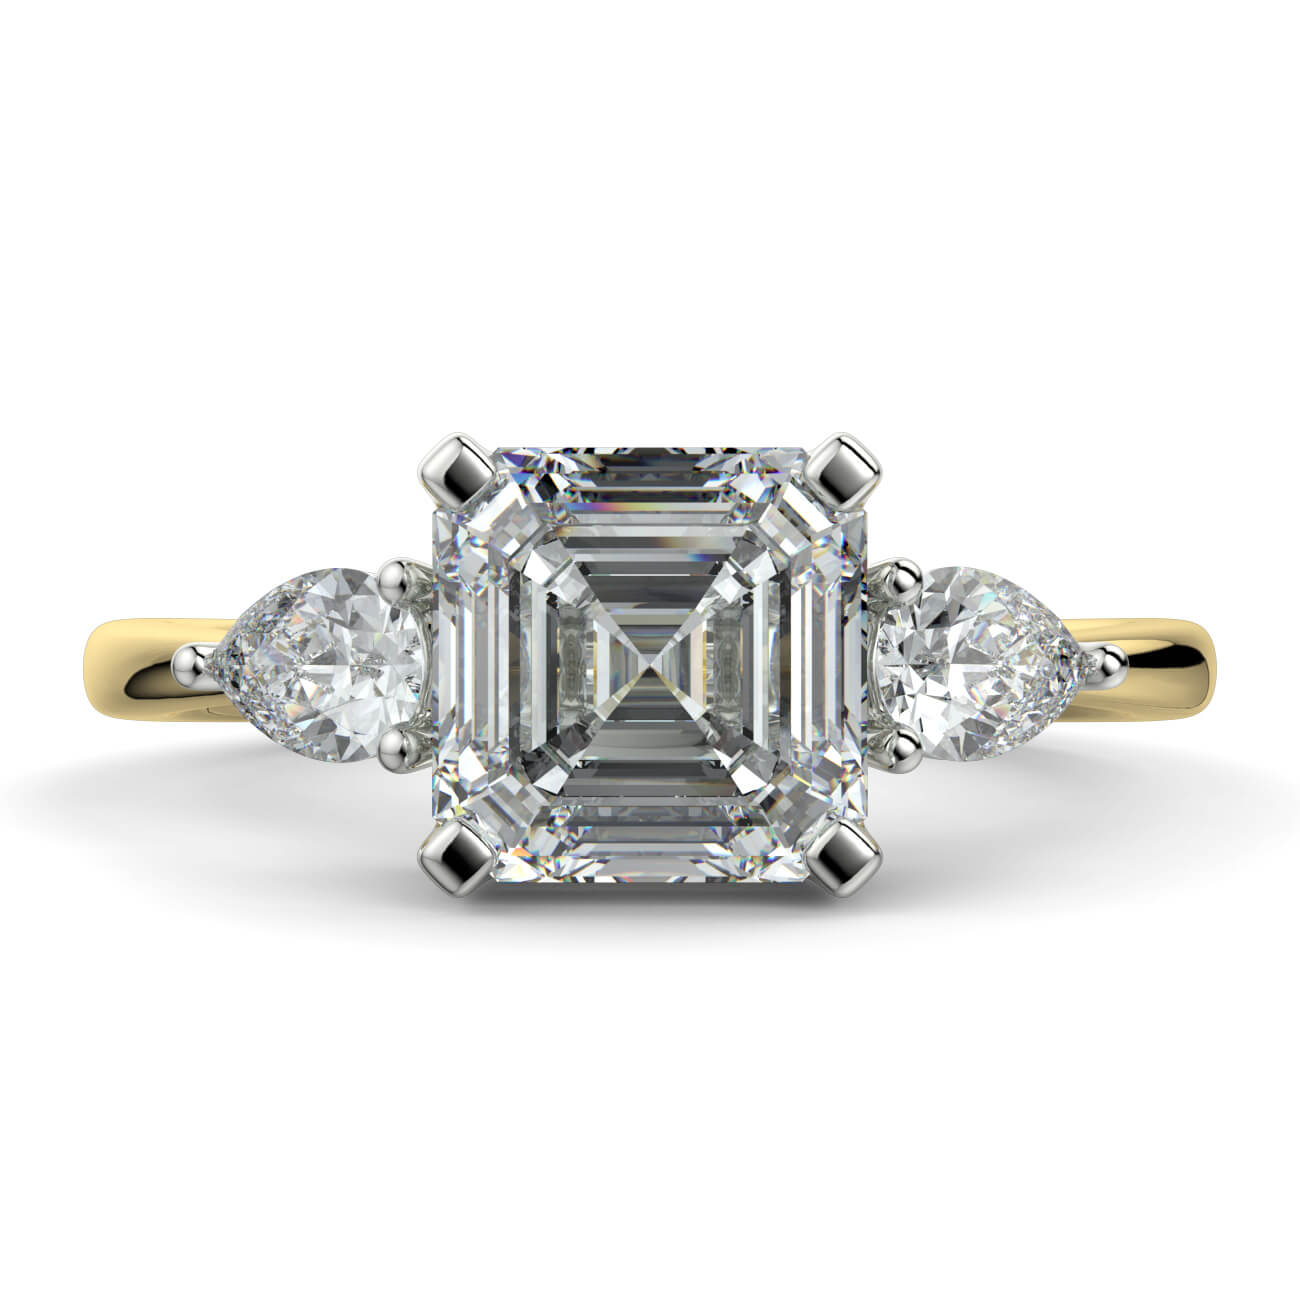 Asscher Cut Diamond Ring With Pear Shape Side Diamonds In Yellow and White Gold – Australian Diamond Network